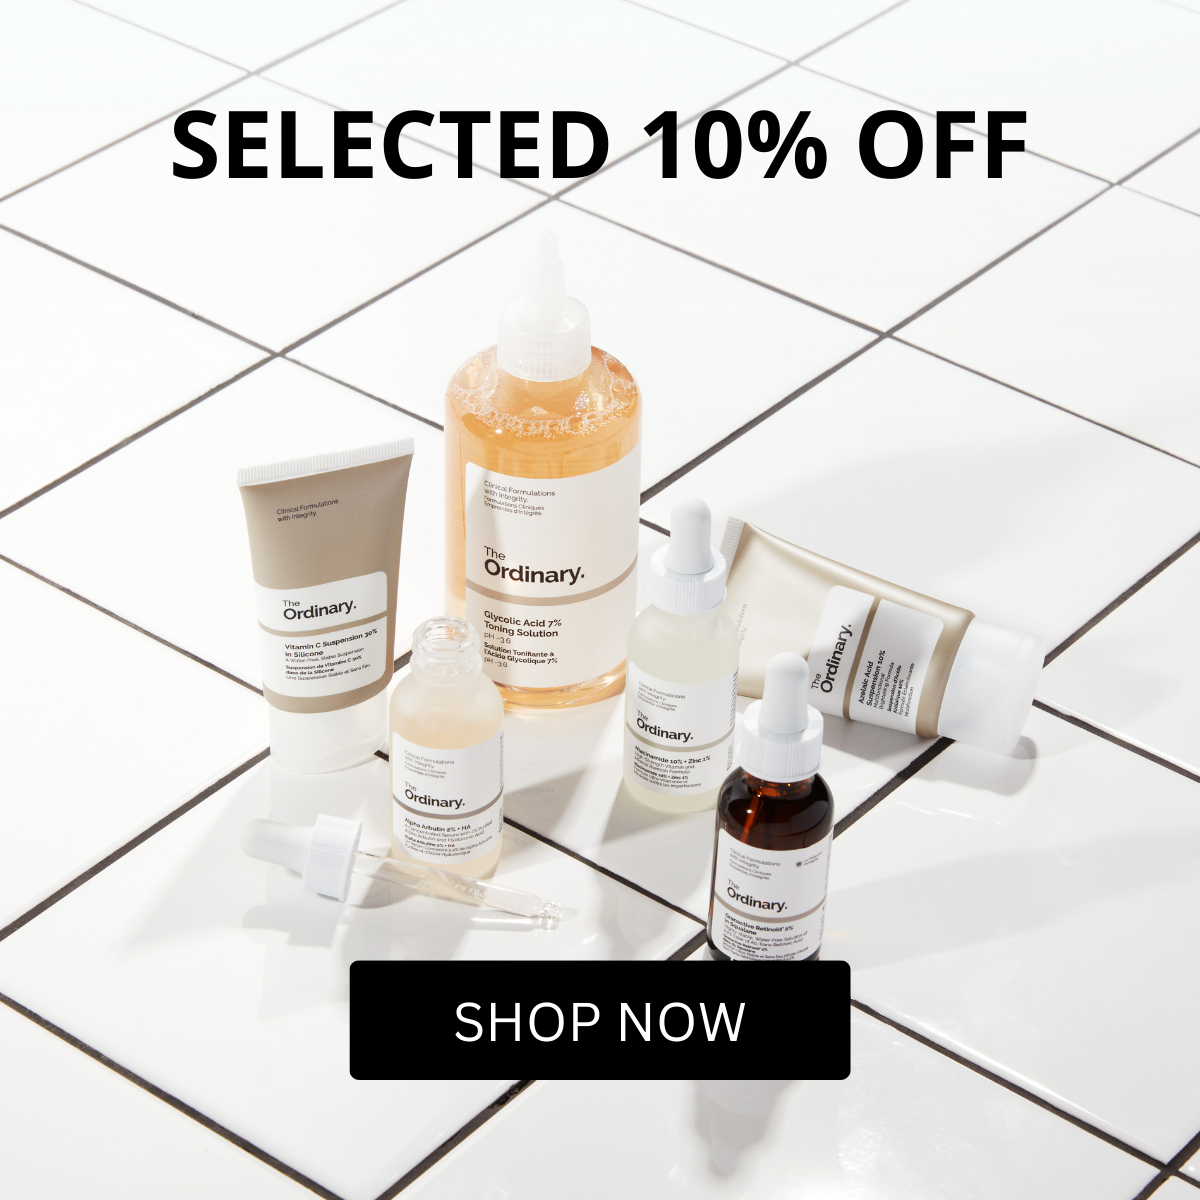 The Ordinary 10% OFF